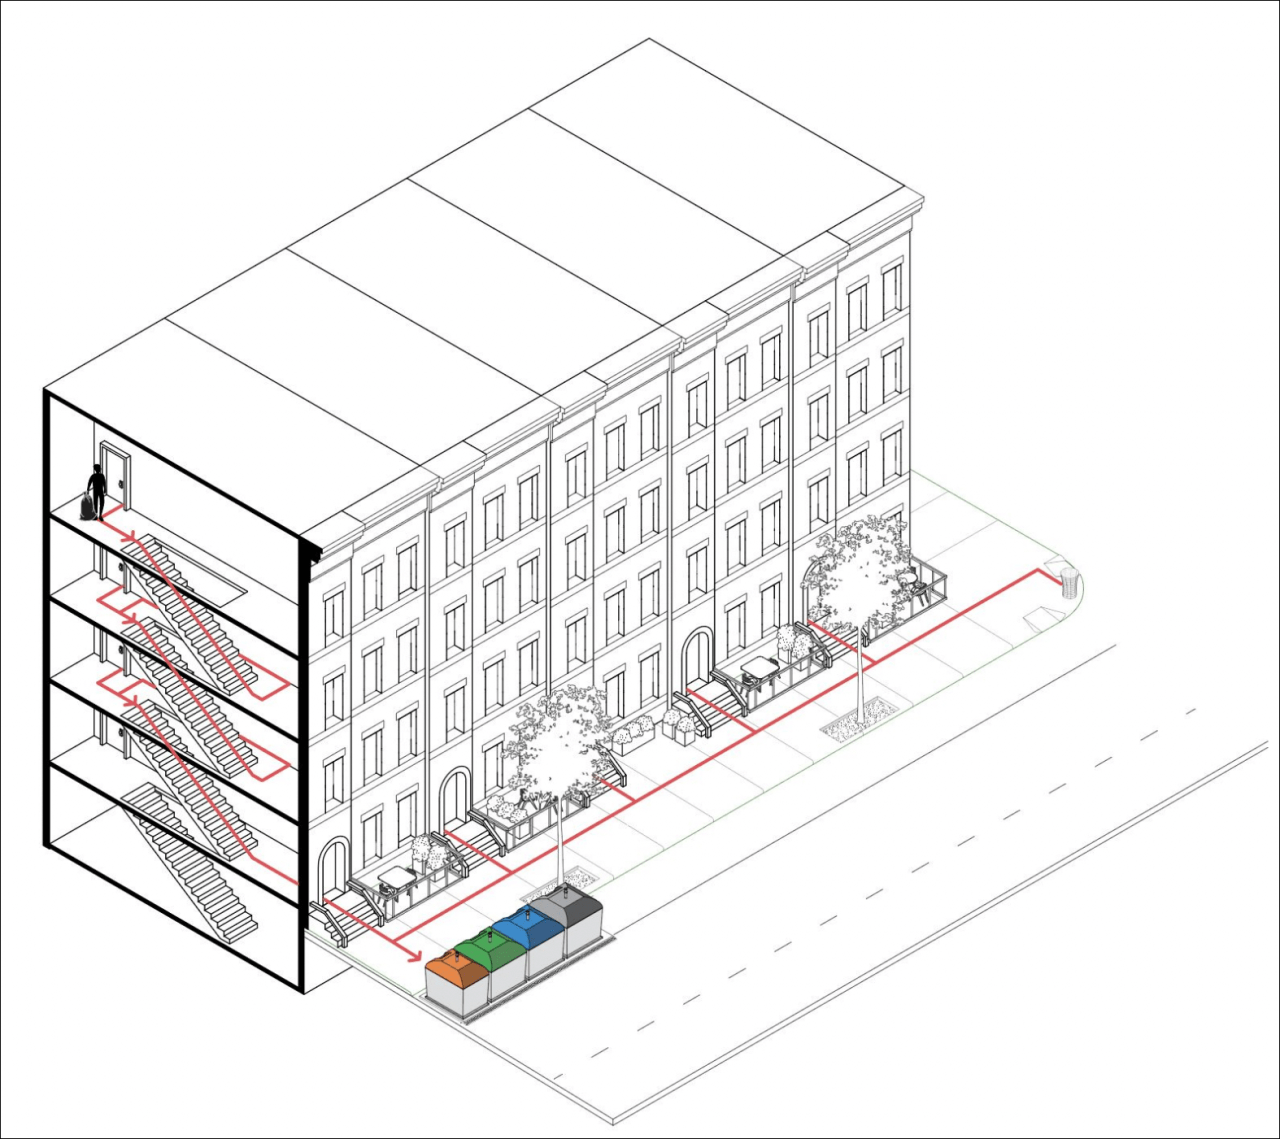 The city could install curbside containers capable of keeping residential garbage. Rendering: Center for Zero Waste Design